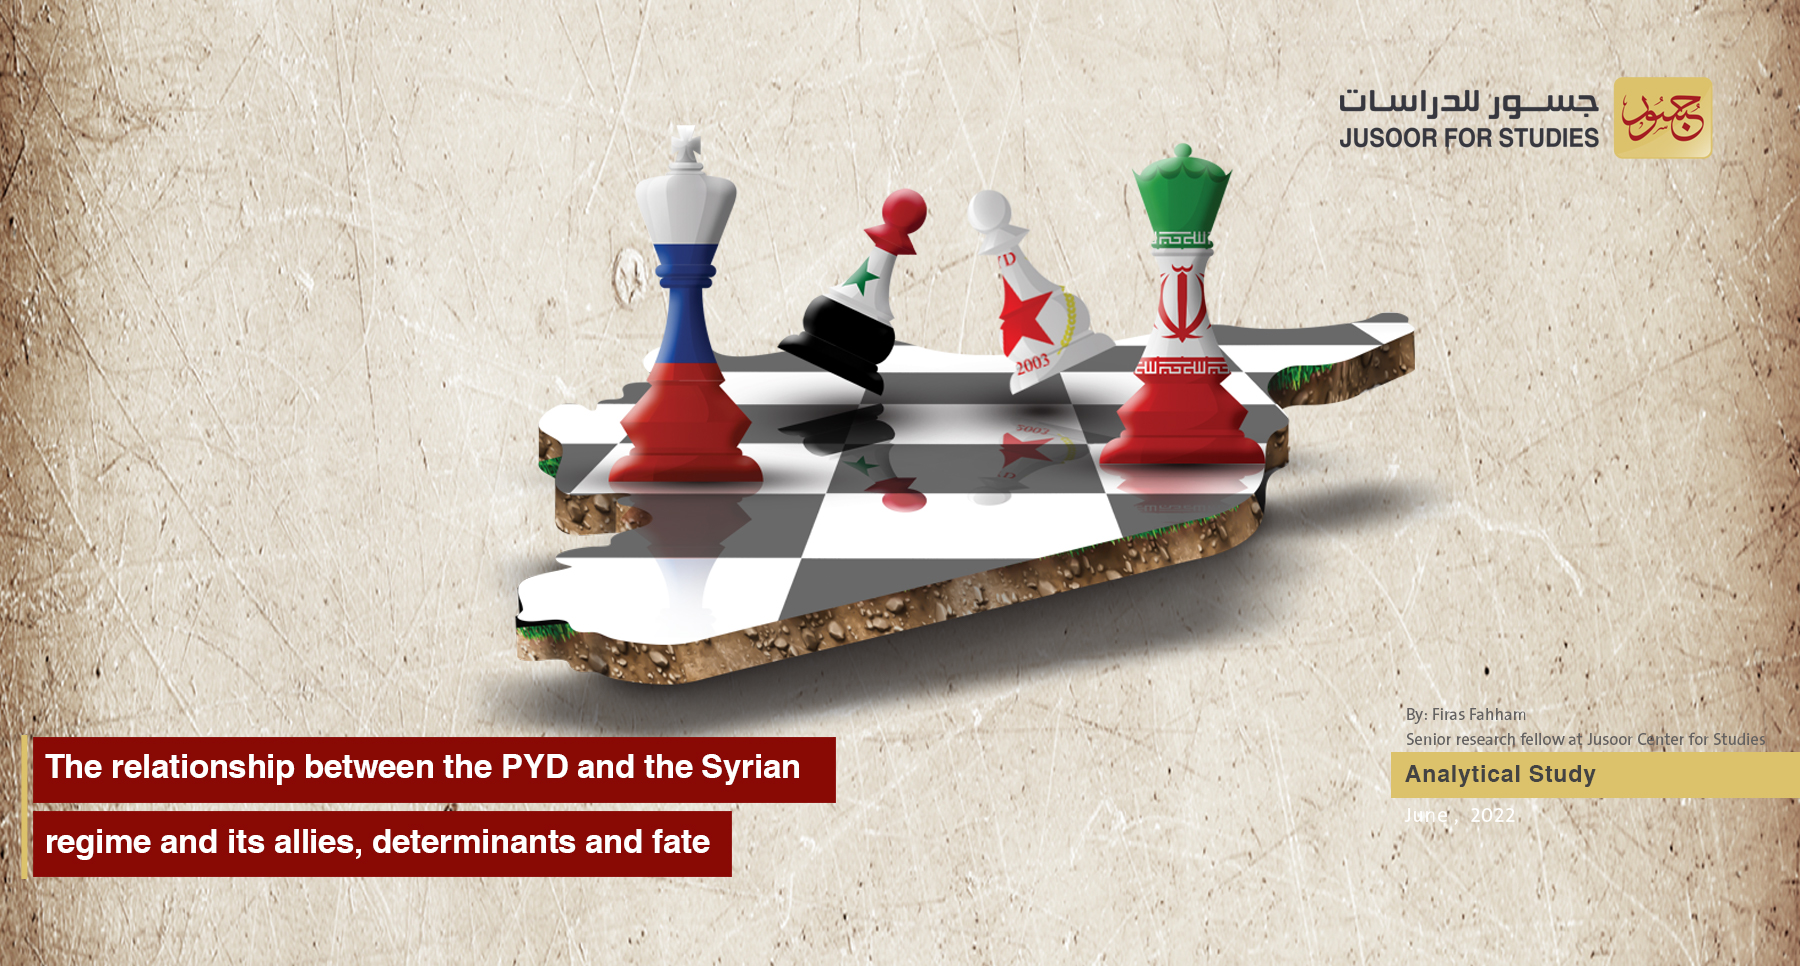 The relationship between the PYD and the Syrian regime and its allies, determinants and fate